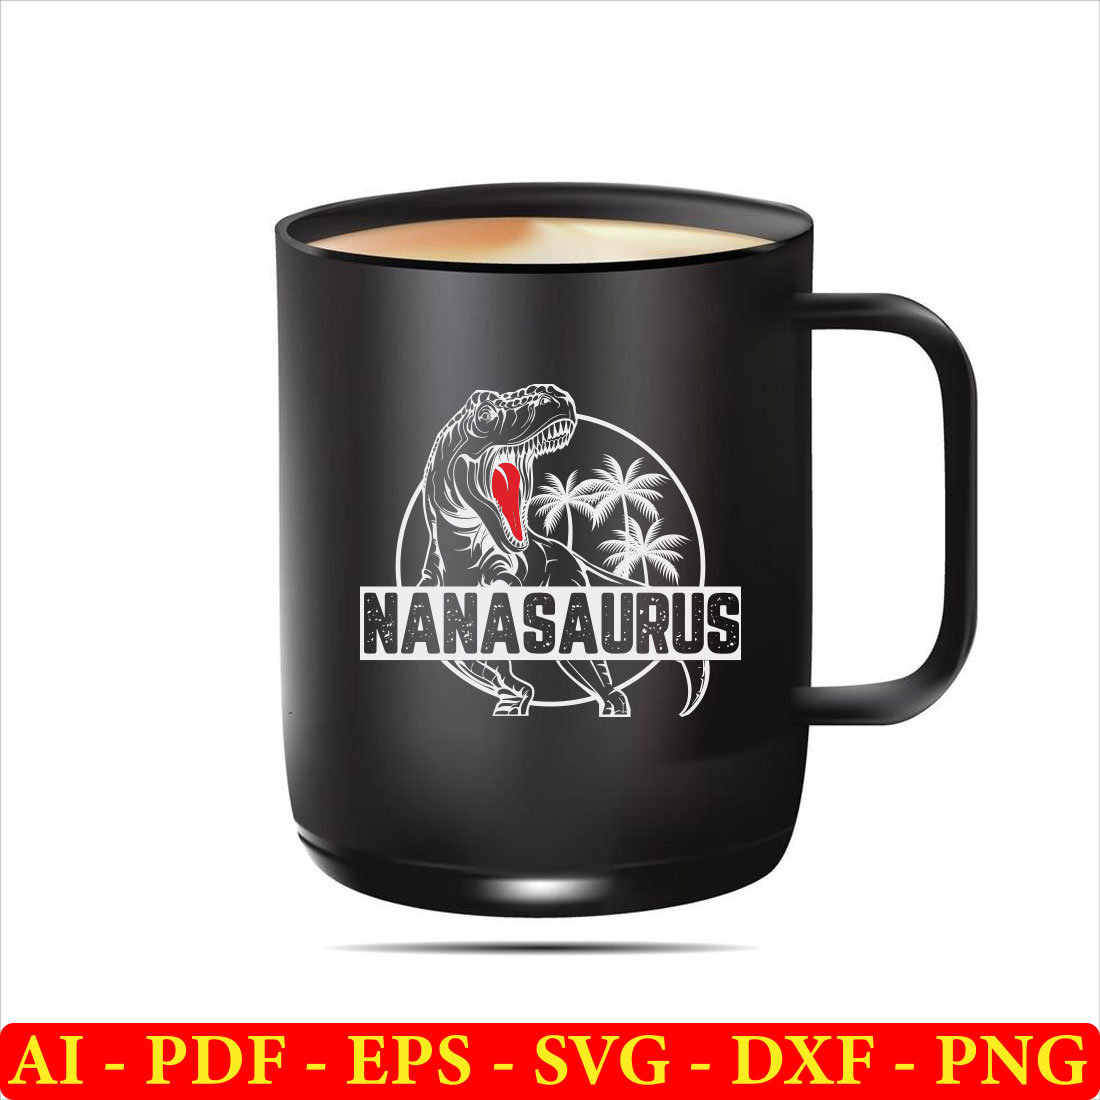 Black coffee mug with a picture of a dinosaur on it.